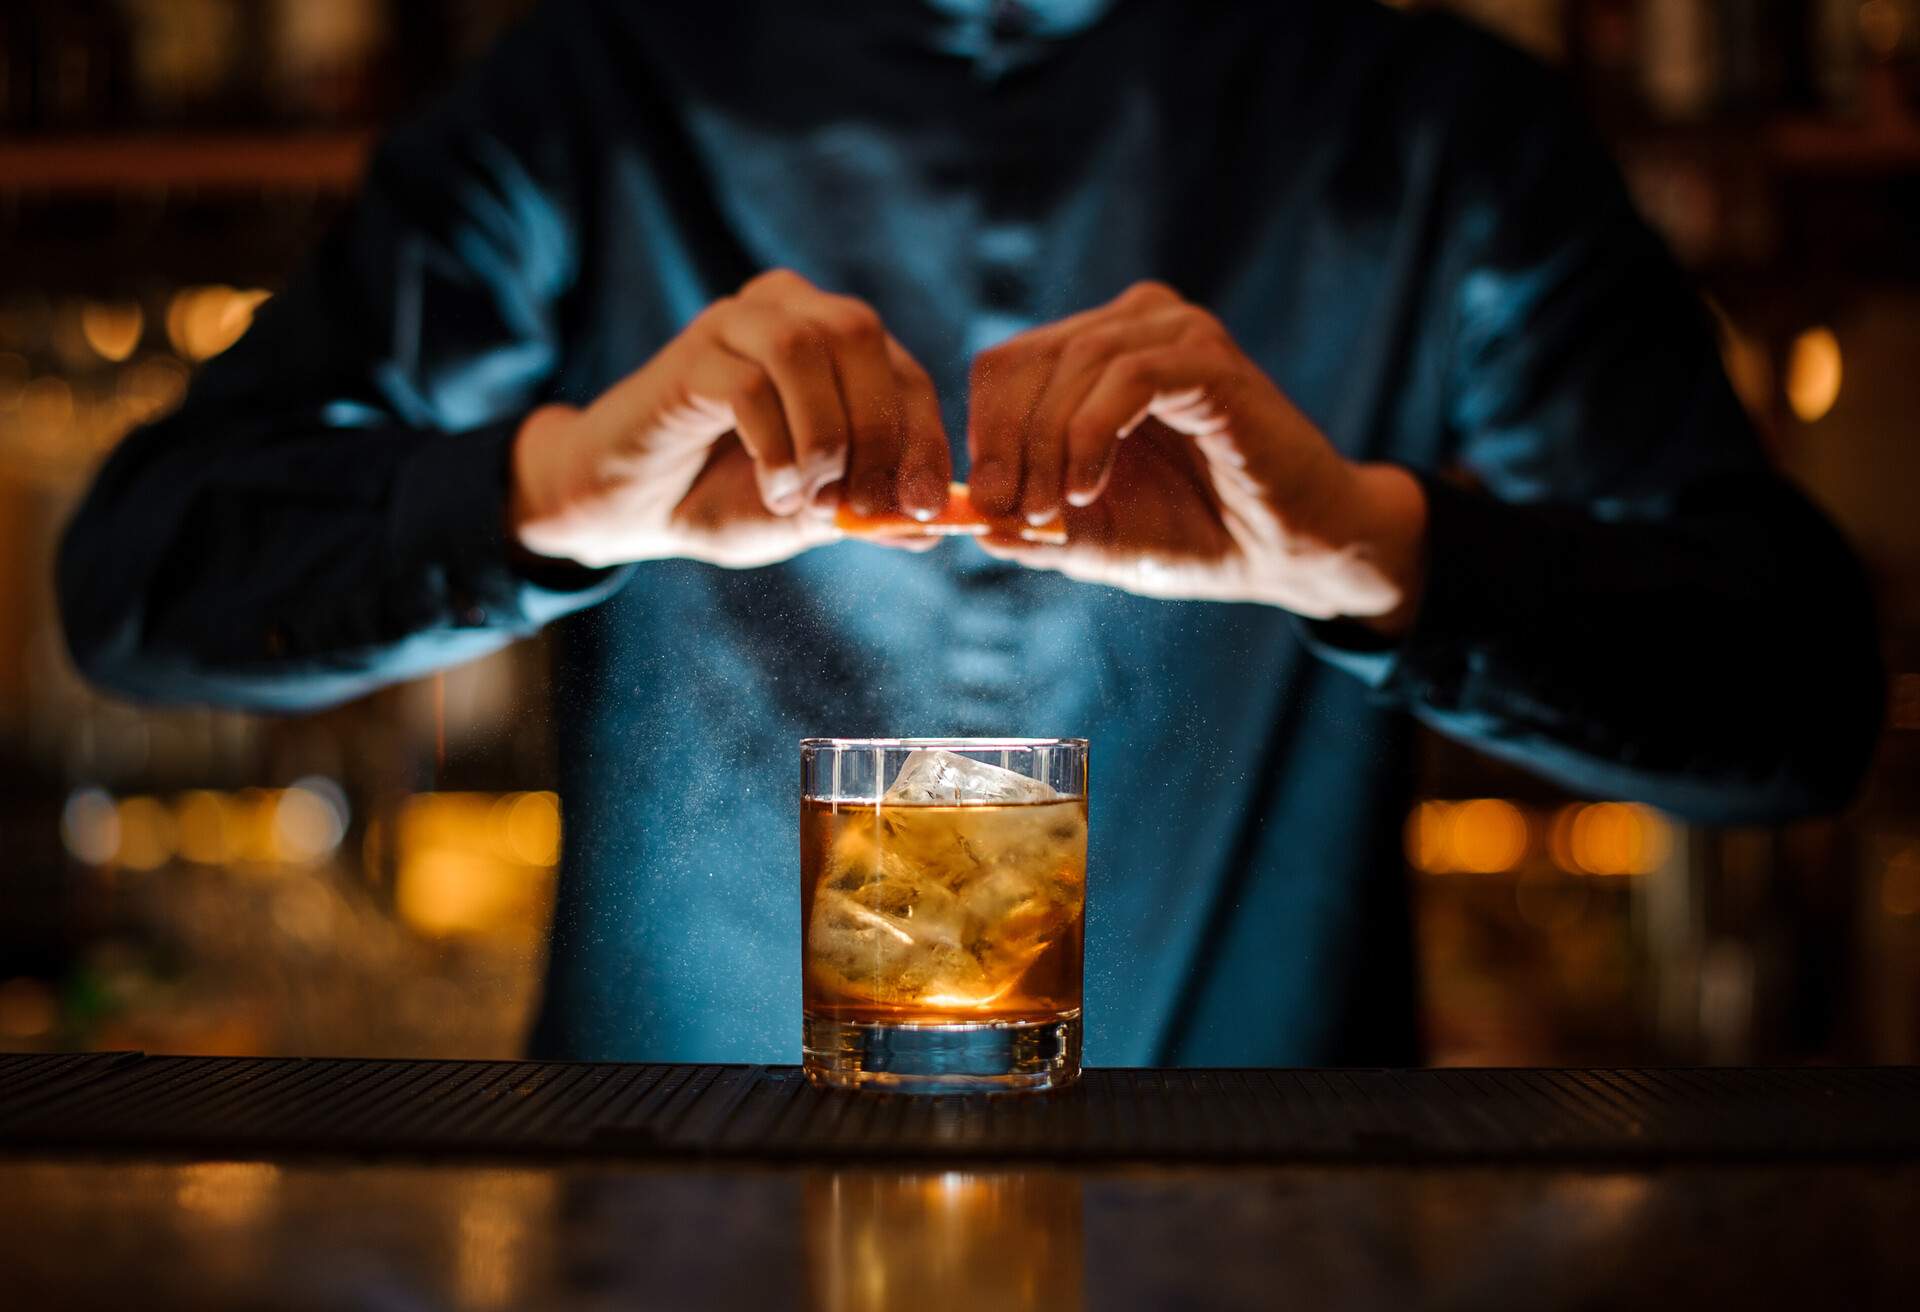 A bartender squeezes an orange over a glass of cocktail drink.